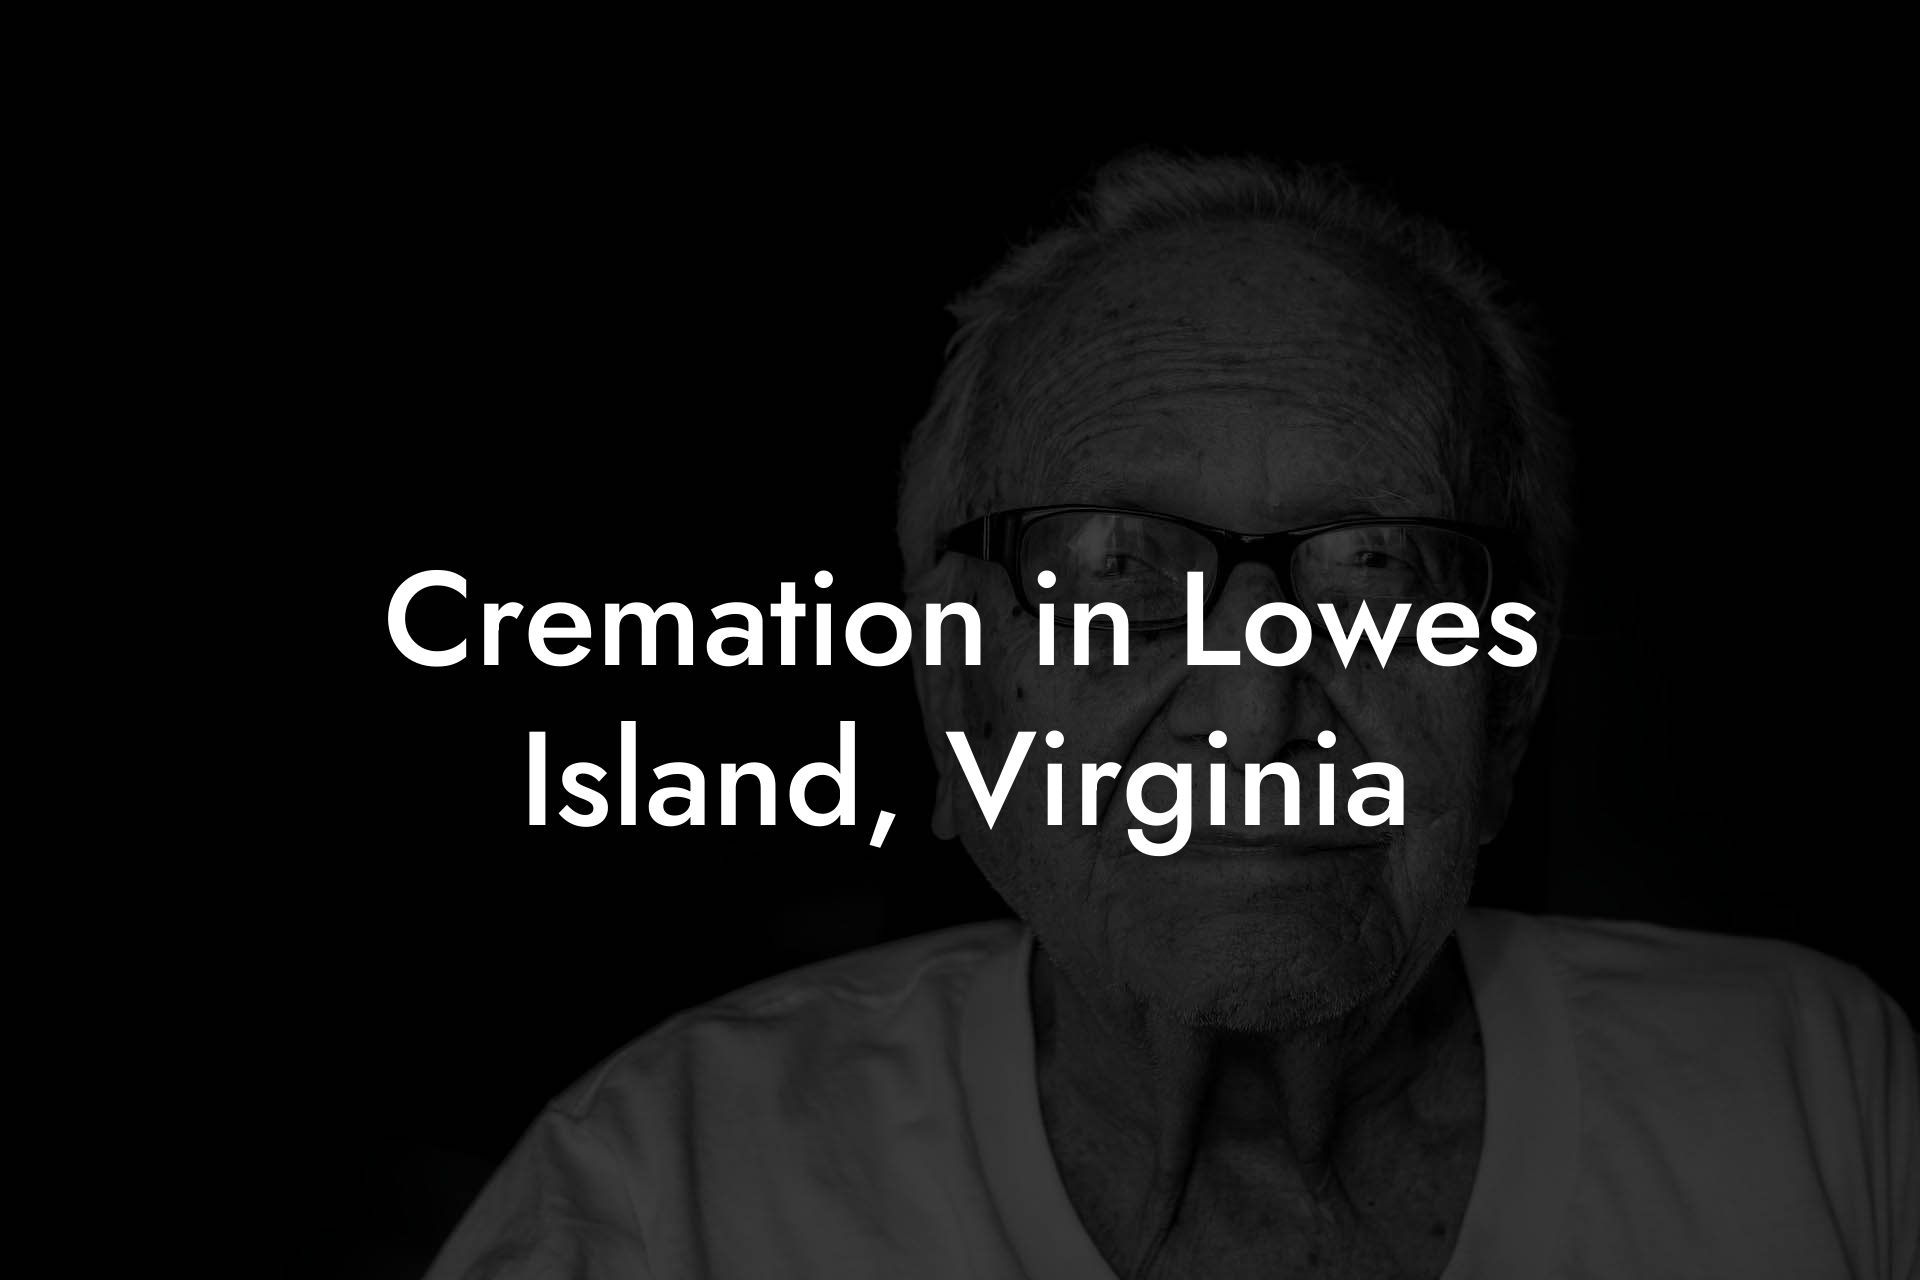 Cremation in Lowes Island, Virginia